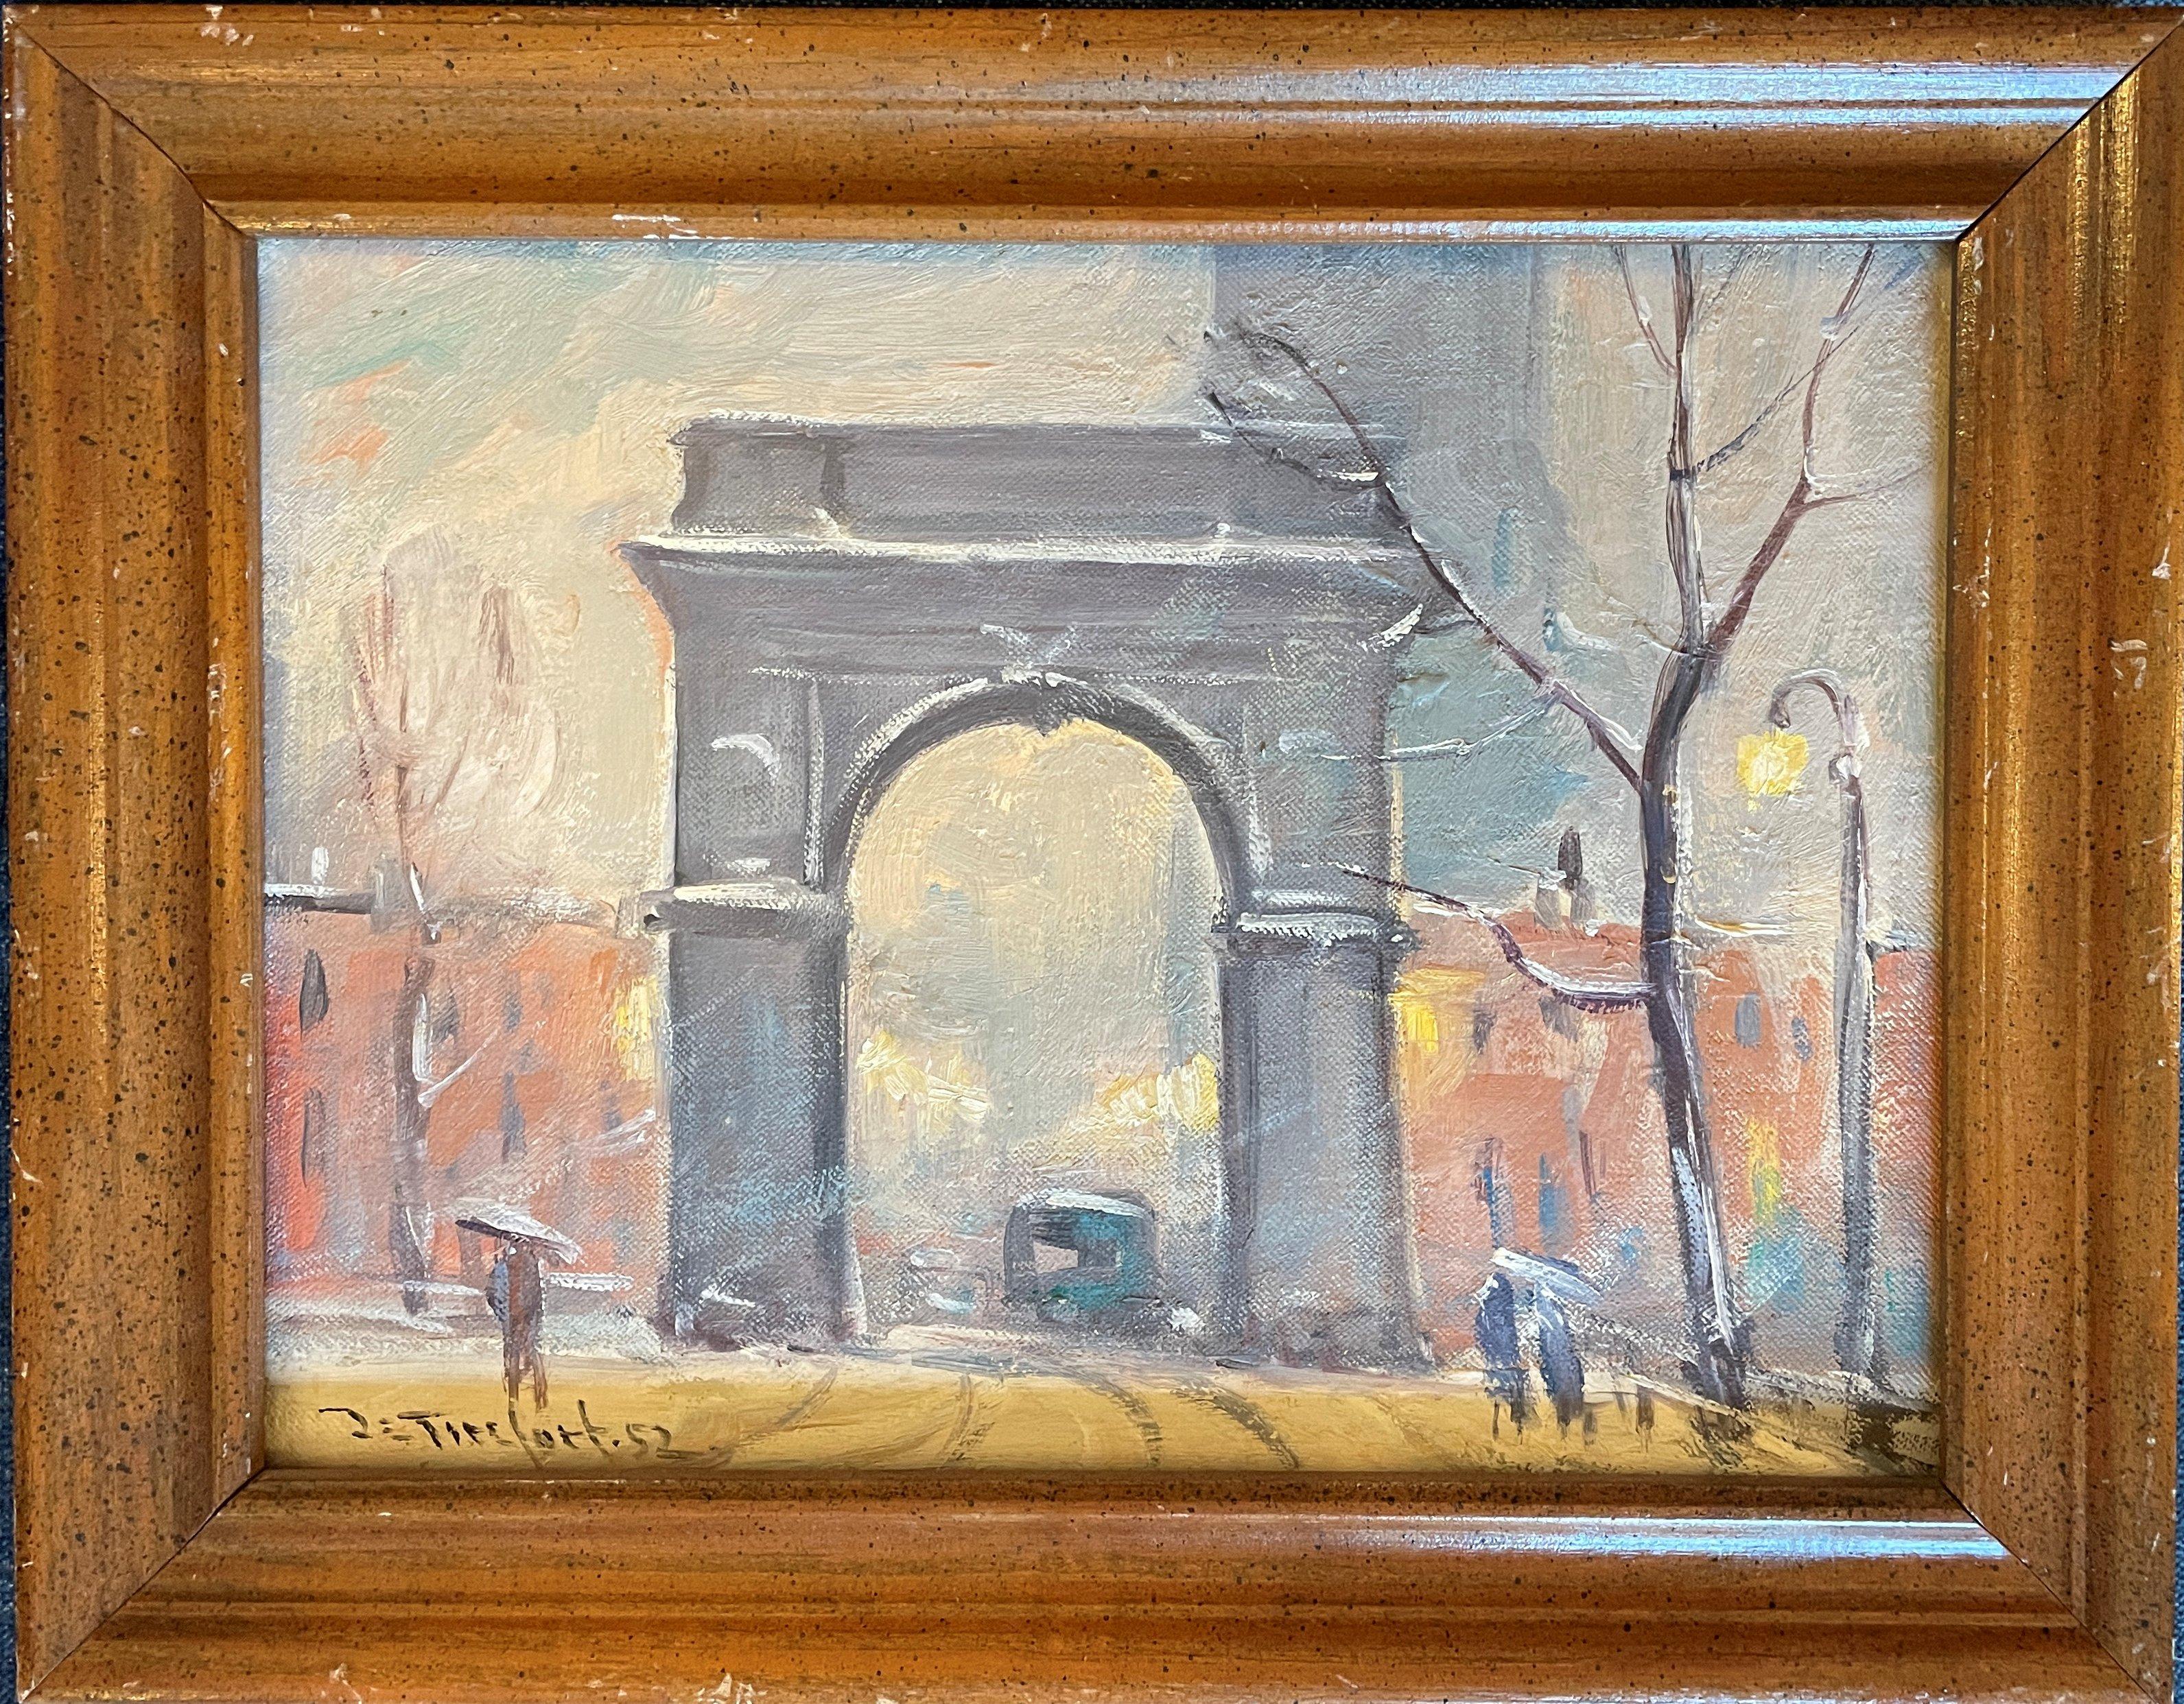 Bela de Tirefort (1894 – 1993)
Washington Square Park, 1952
Oil on canvasboard
9 x 12 inches
Signed and dated lower left

Provenance:
Private Collection, Nyack, New York

Bela de Tirefort was born in Eastern Europe, painted in New York City, and